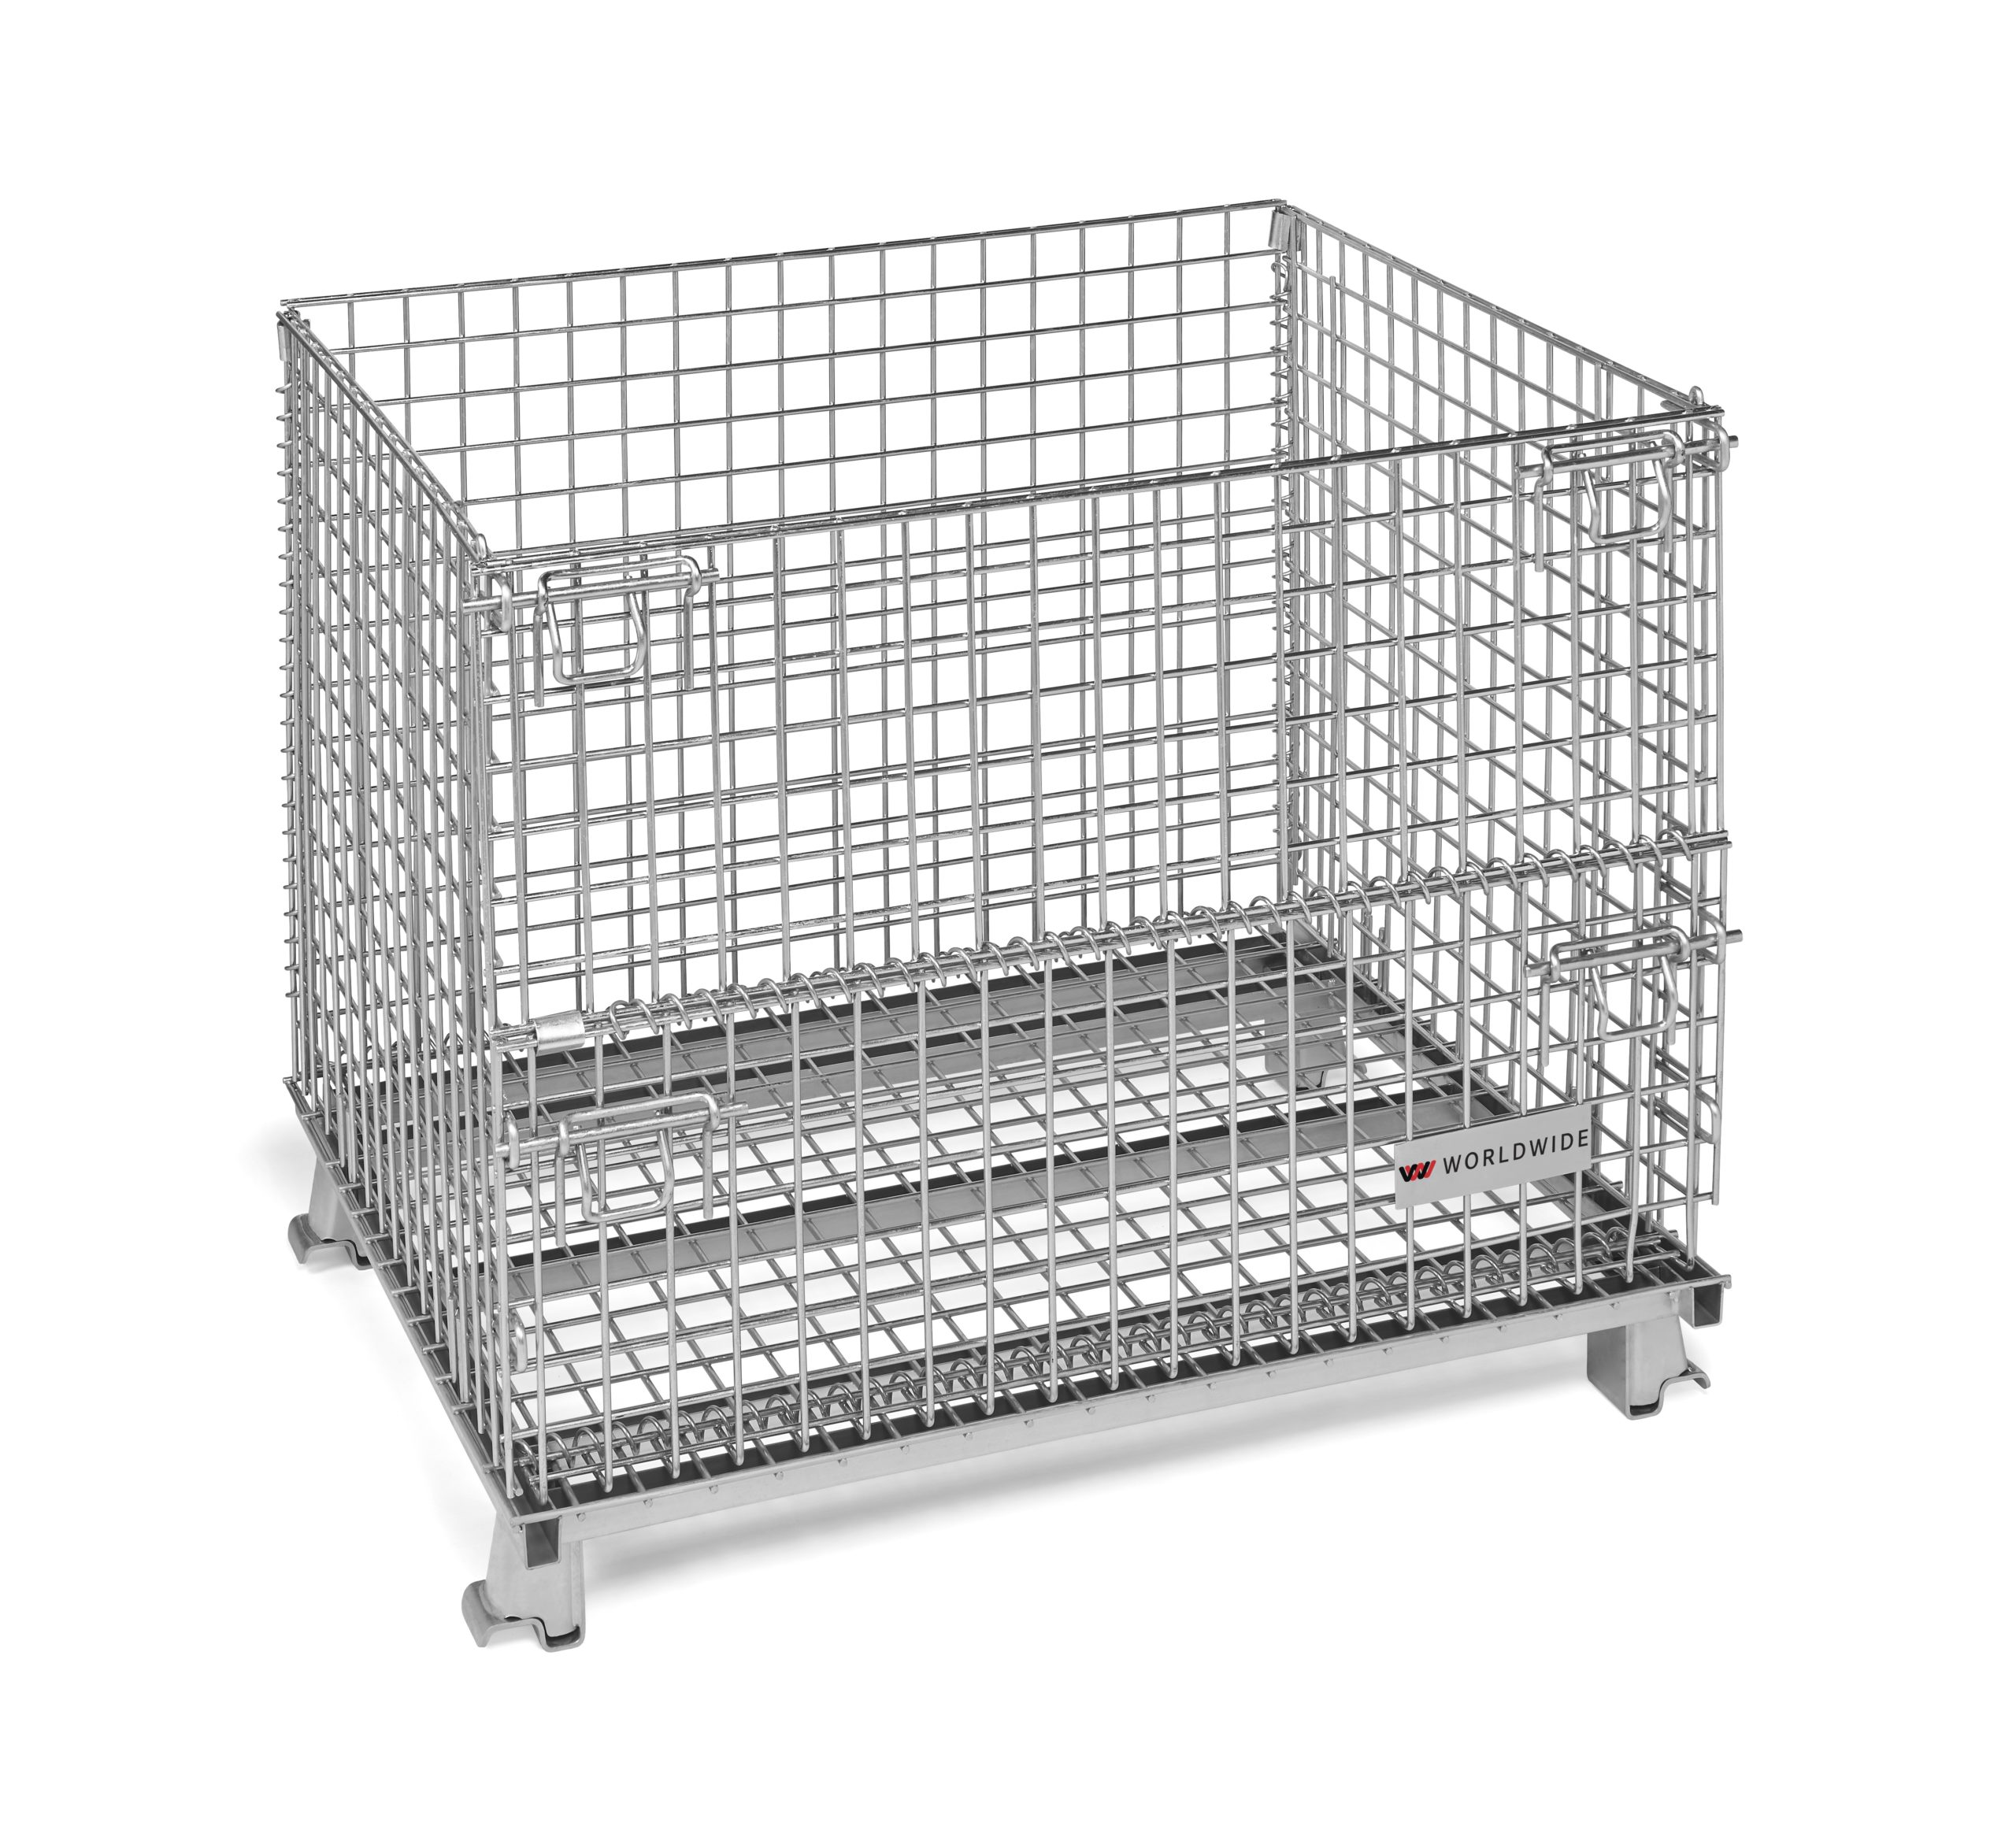 https://rackandshelf.com/wp-content/uploads/2022/09/40x48x36-Senior-Wire-Baskets-Containers-scaled.jpg